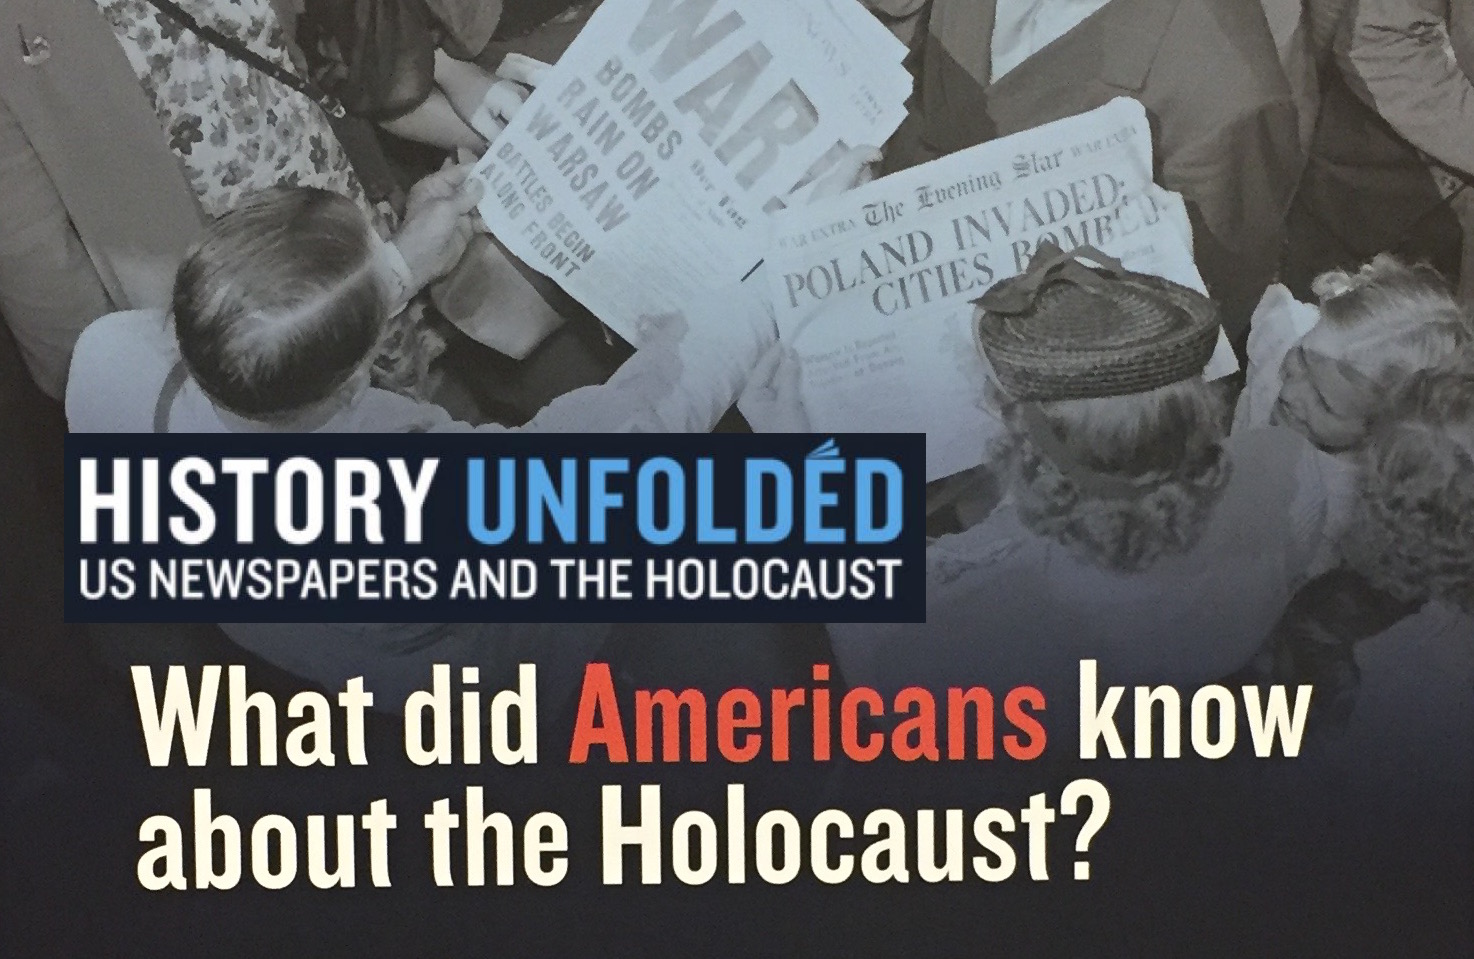 The History Unfolded Newspapers Project